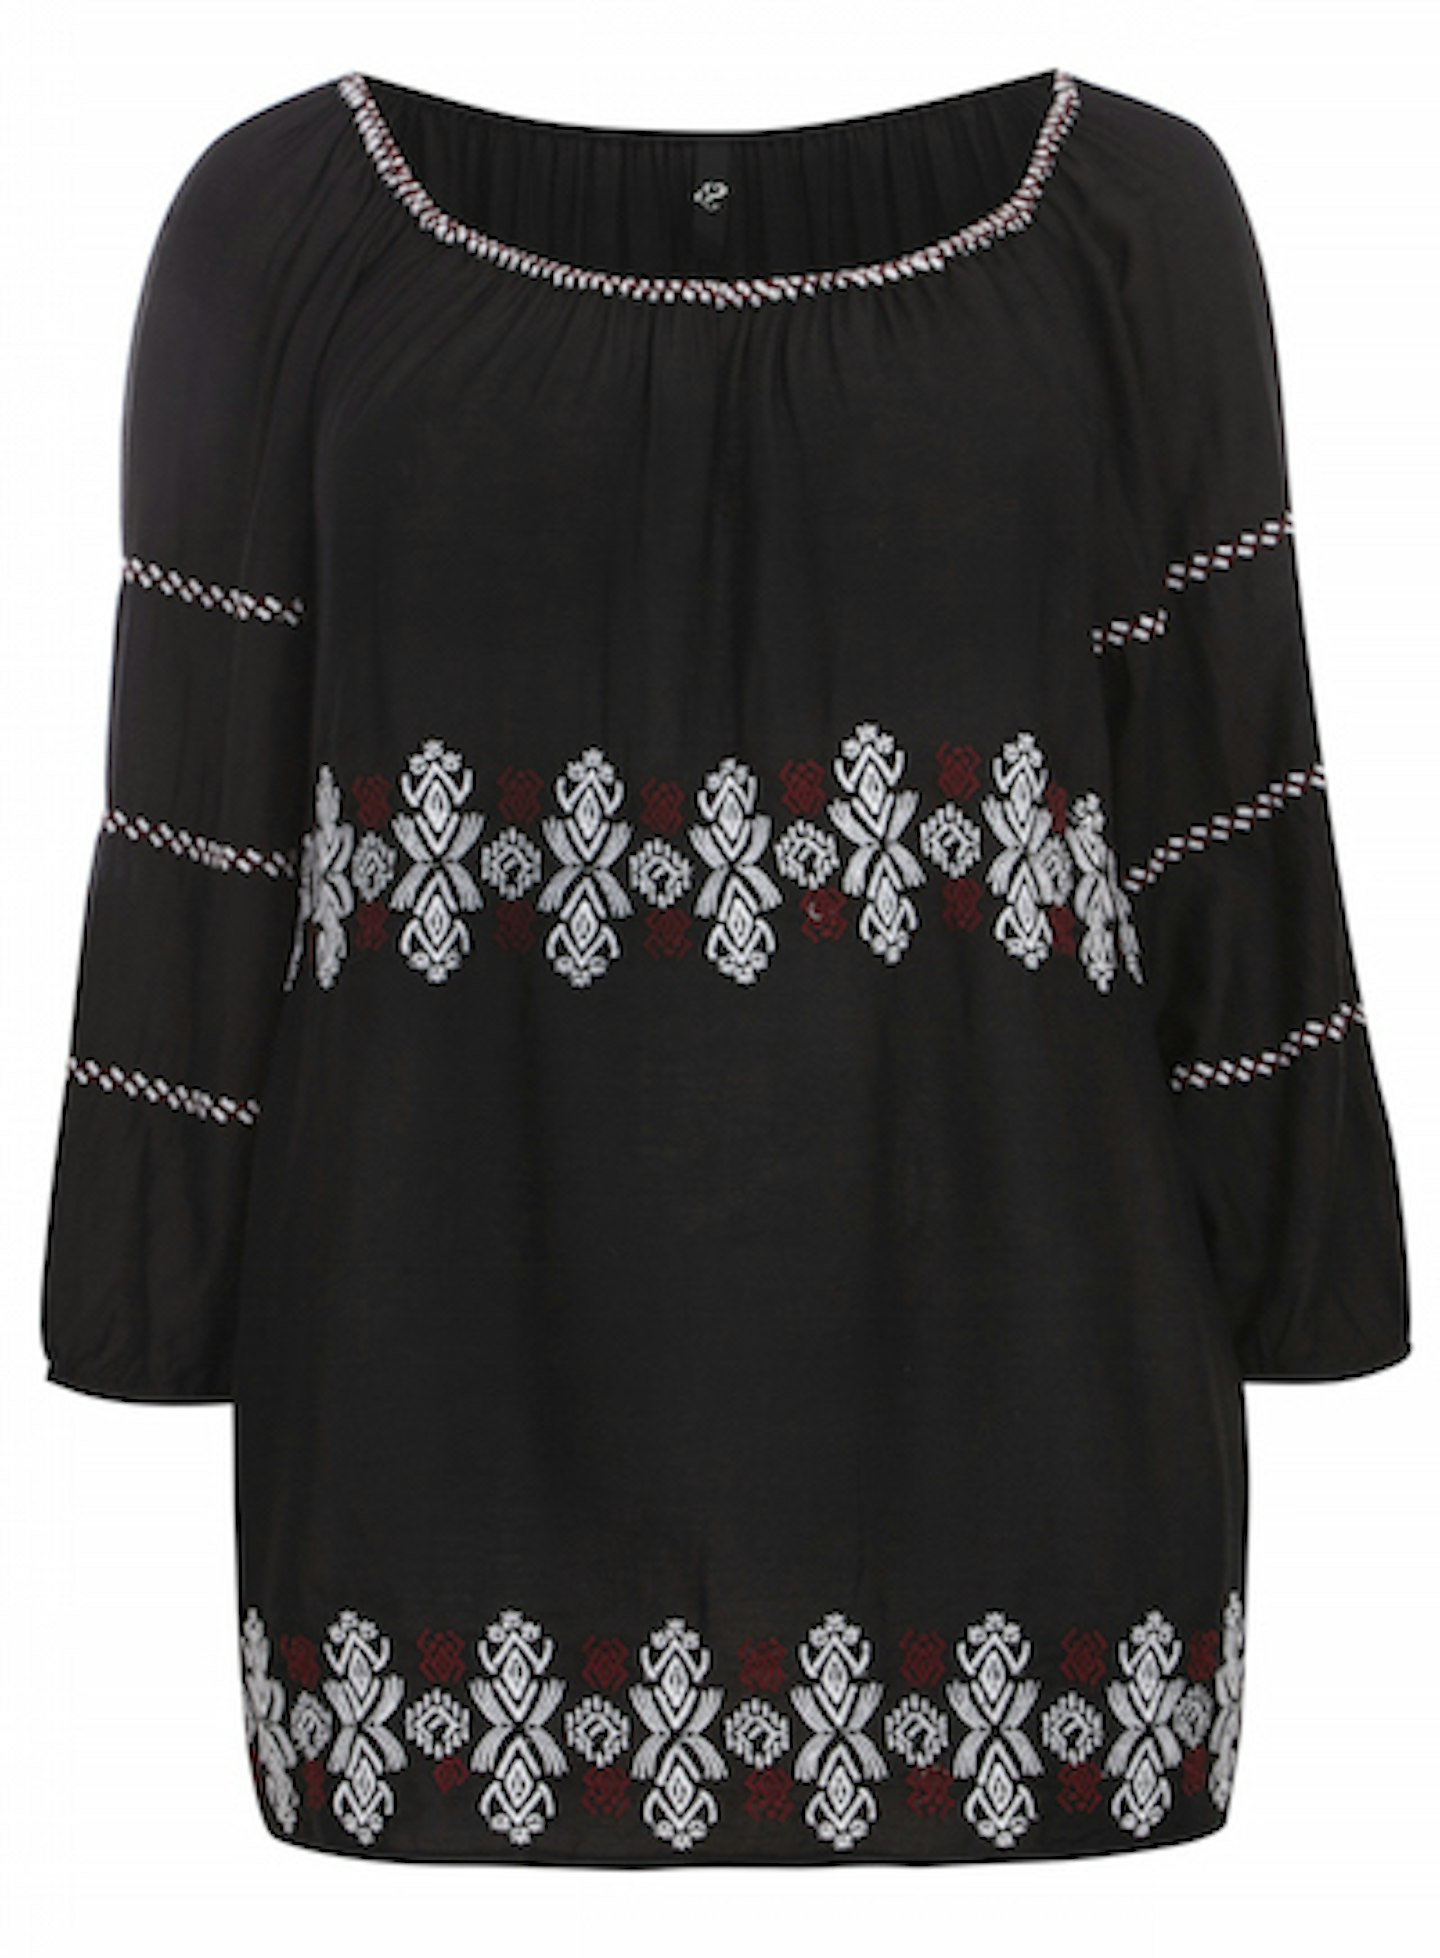 Black embroidered gypsy top £28